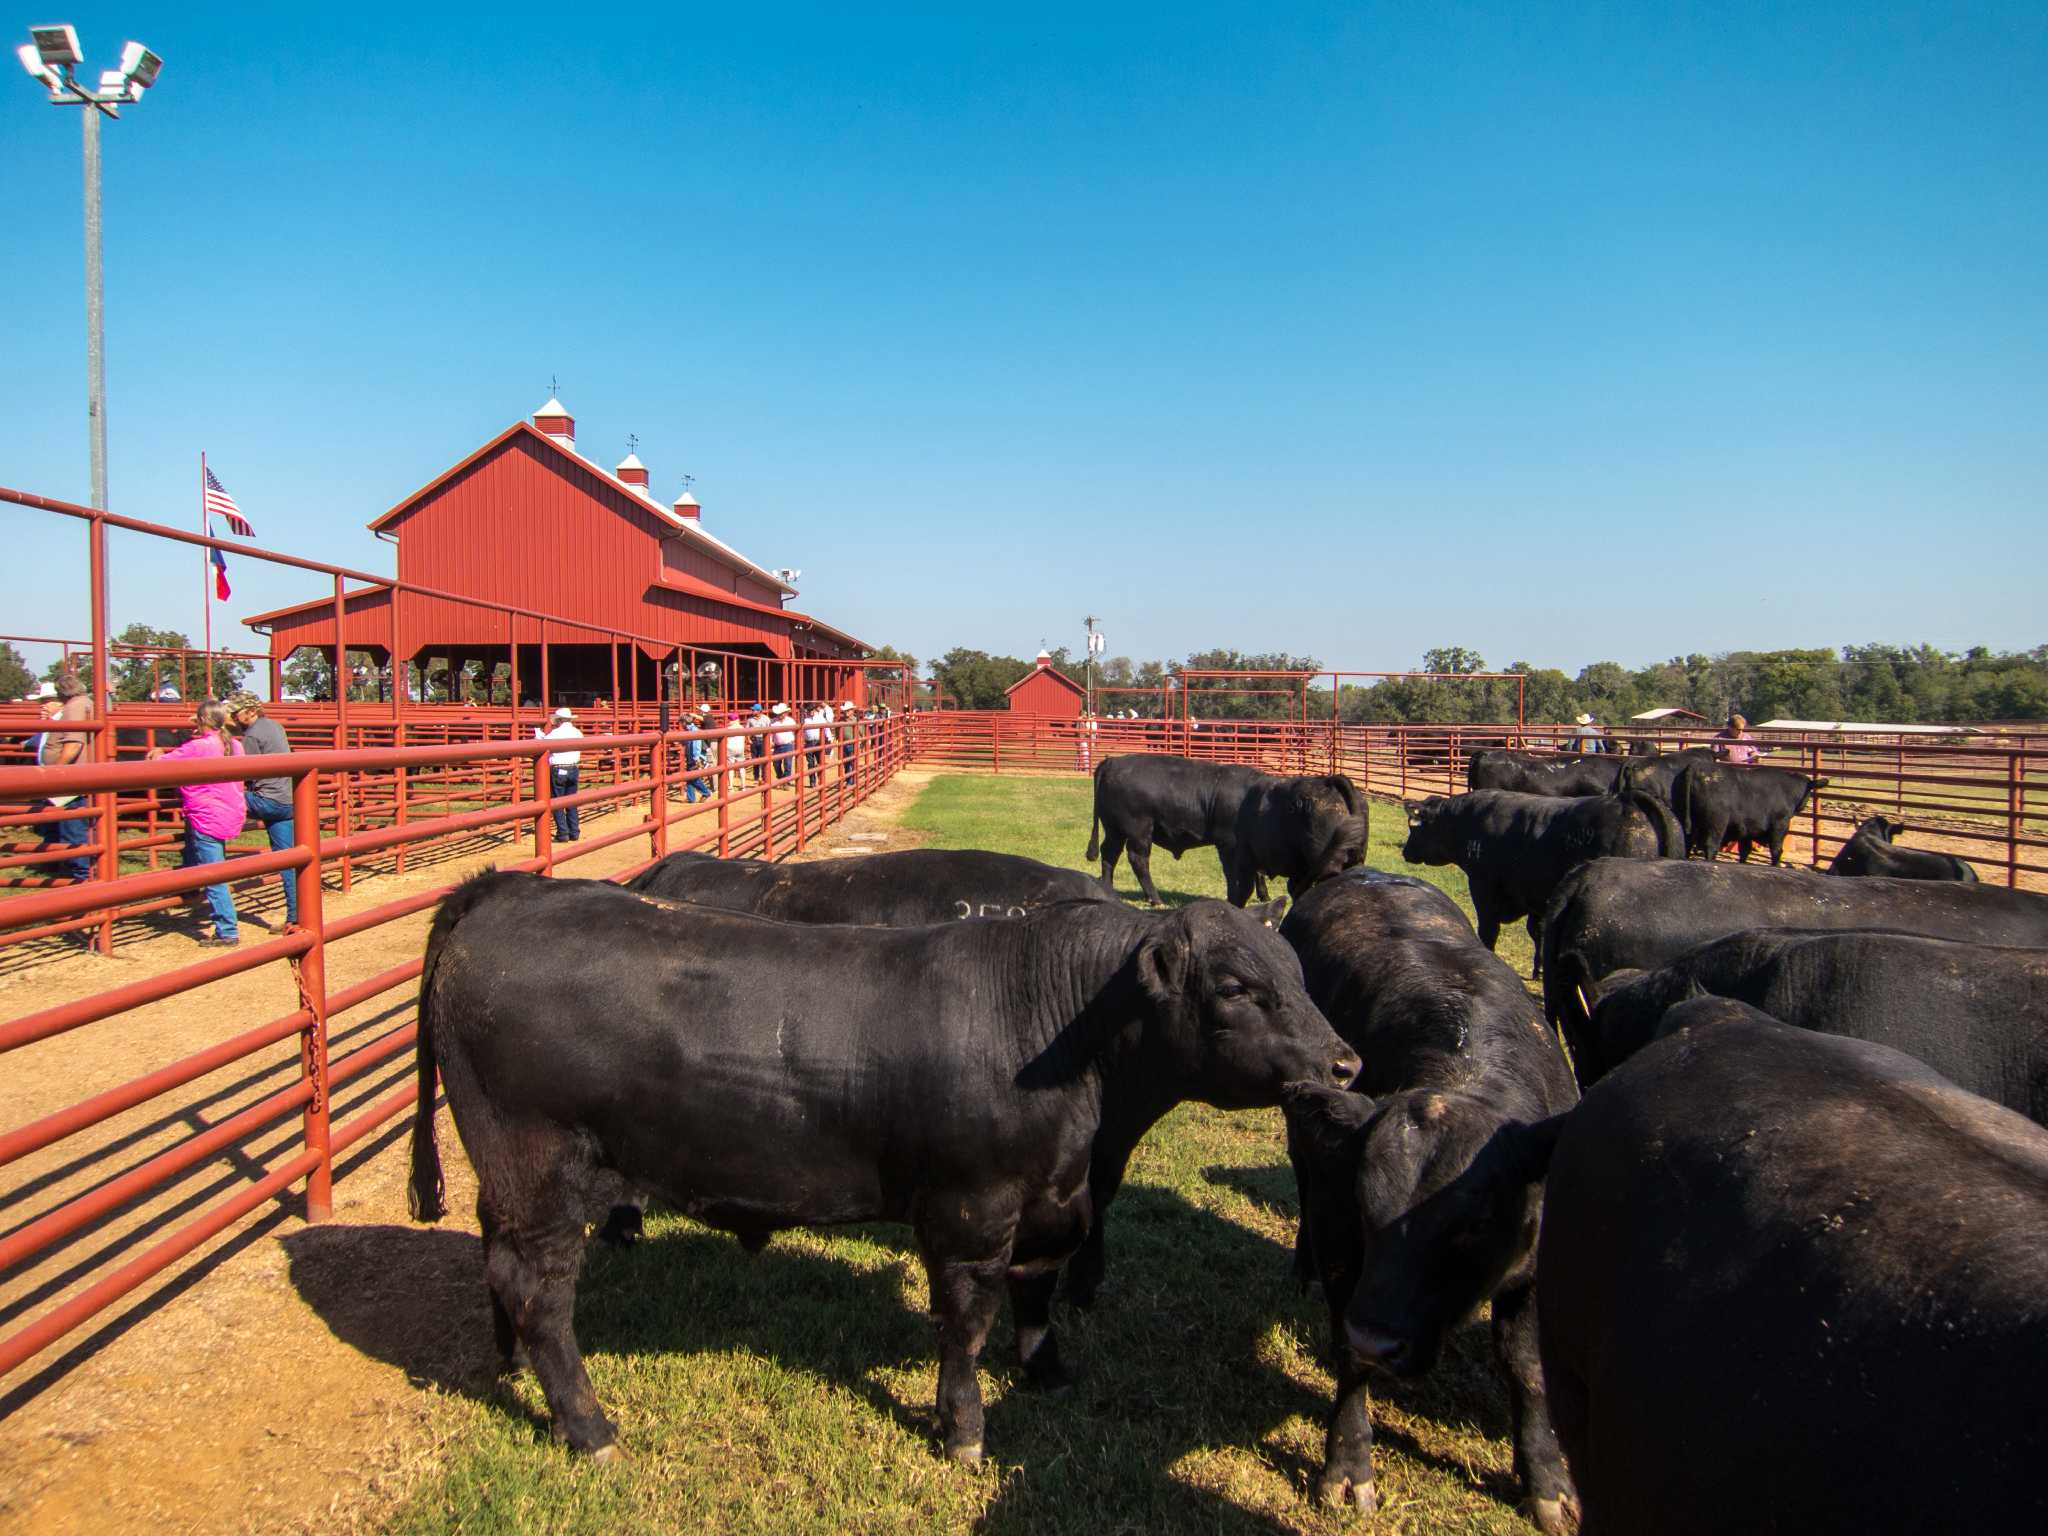 2048x1536 Adapt or die: A central Texas cattle ranch changes with the times